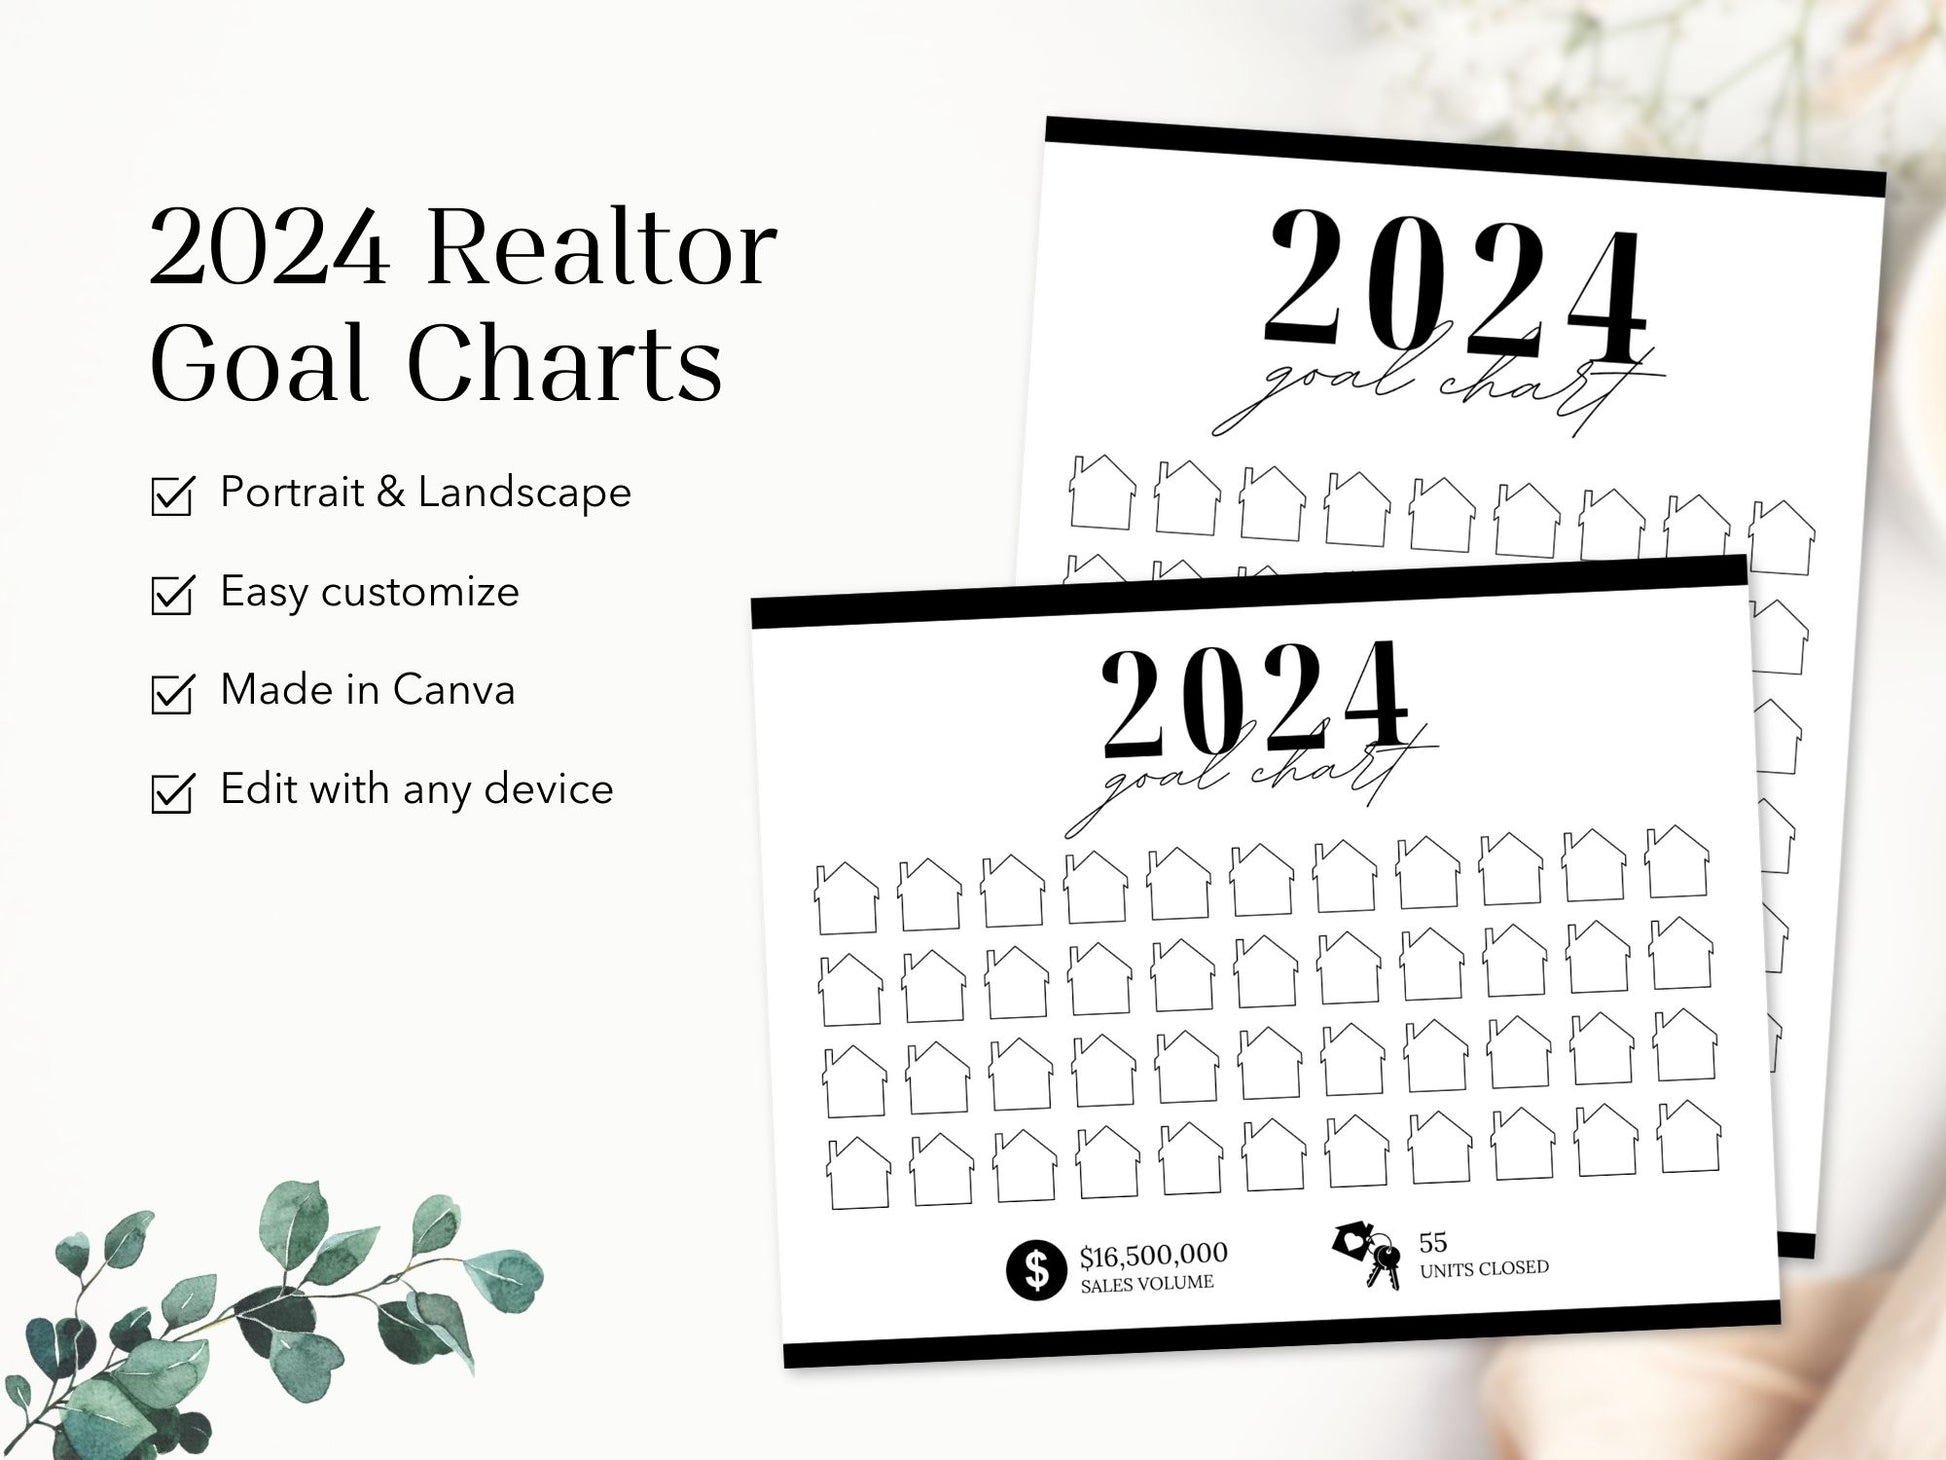 Real Estate Black 2024 Realtor Goal Chart - Sleek and modern chart for goal setting and tracking in a sophisticated black theme, providing a motivational and stylish tool for achieving real estate milestones.